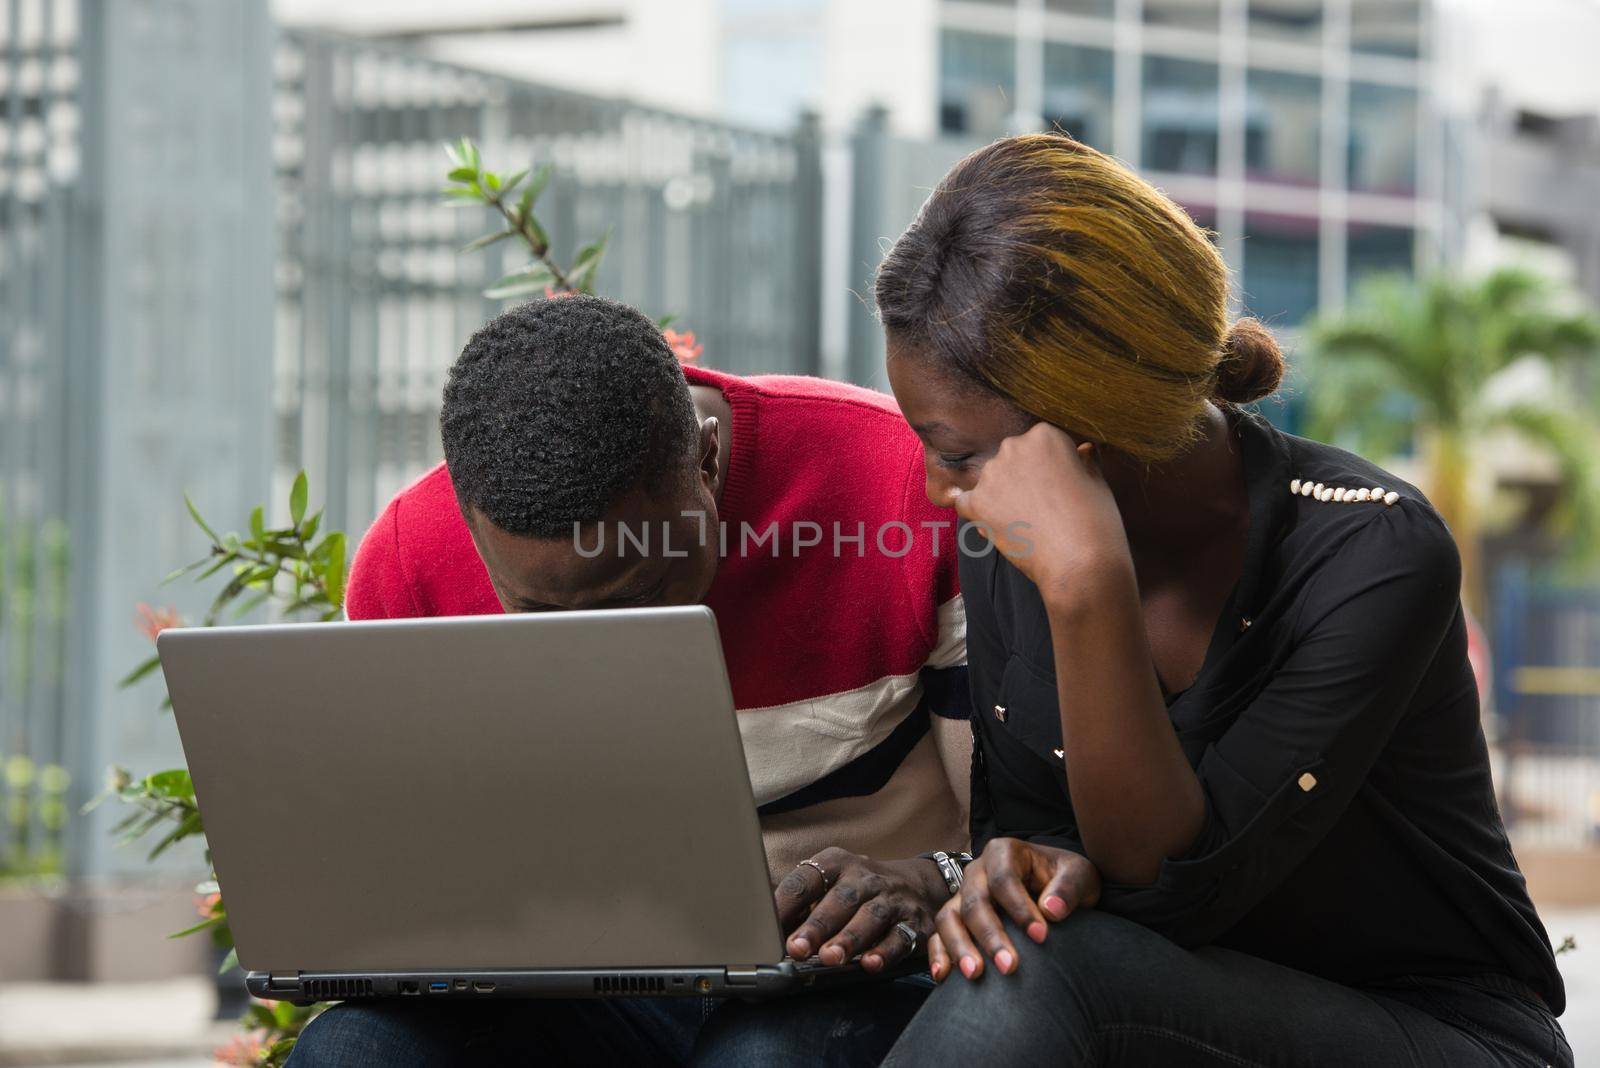 Two students sitting outside while working together on laptop on the side of the road outdoors in the summer.